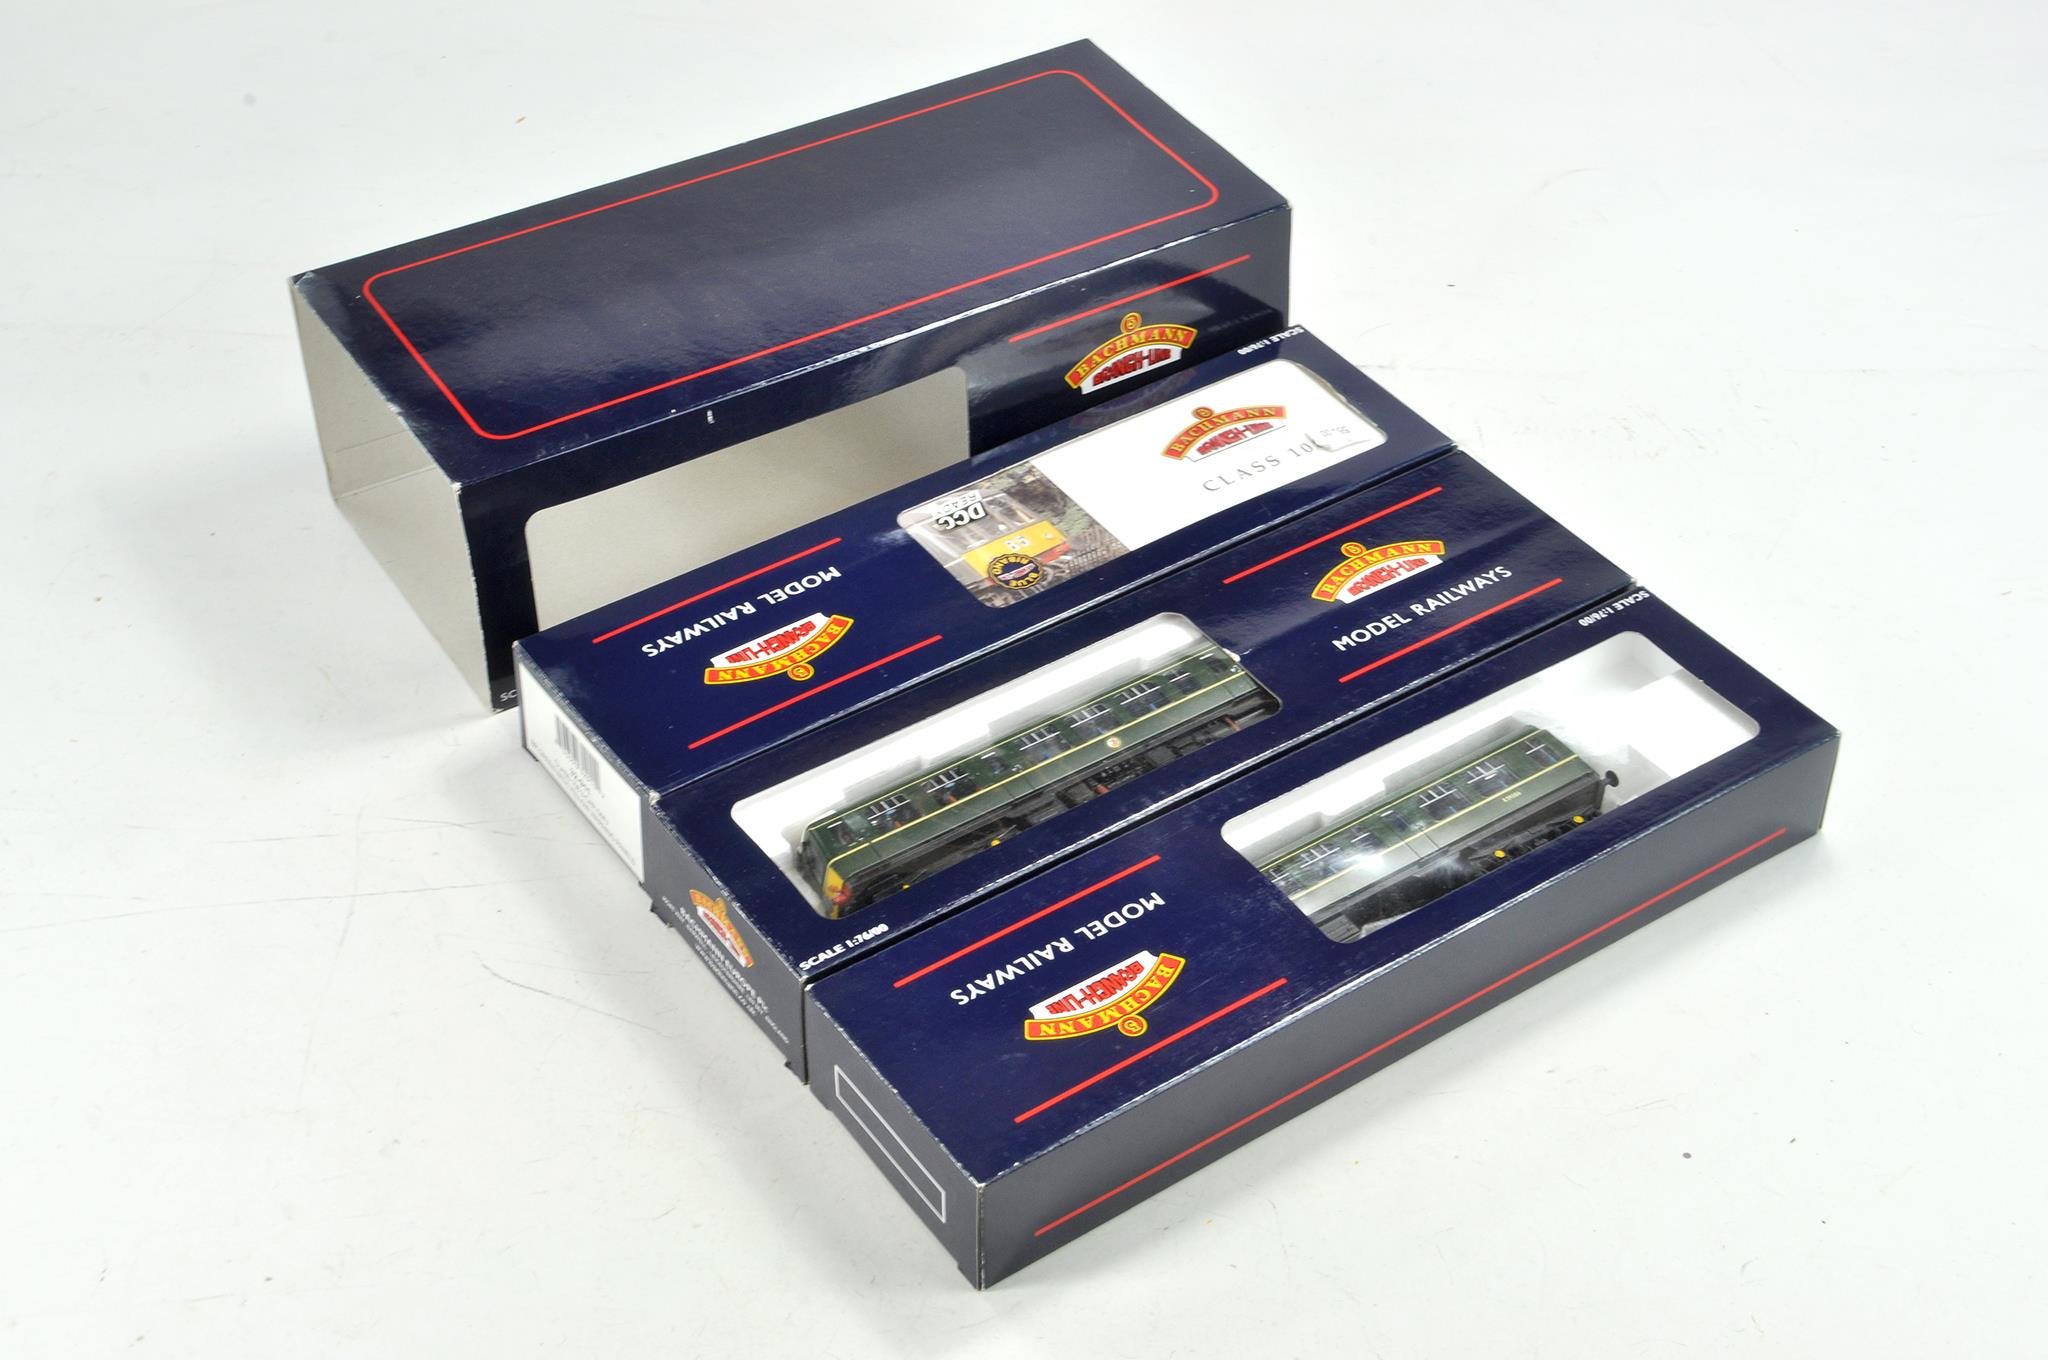 Bachmann Model Railway issues comprising DMU Locomotive set. Appears very good in box.